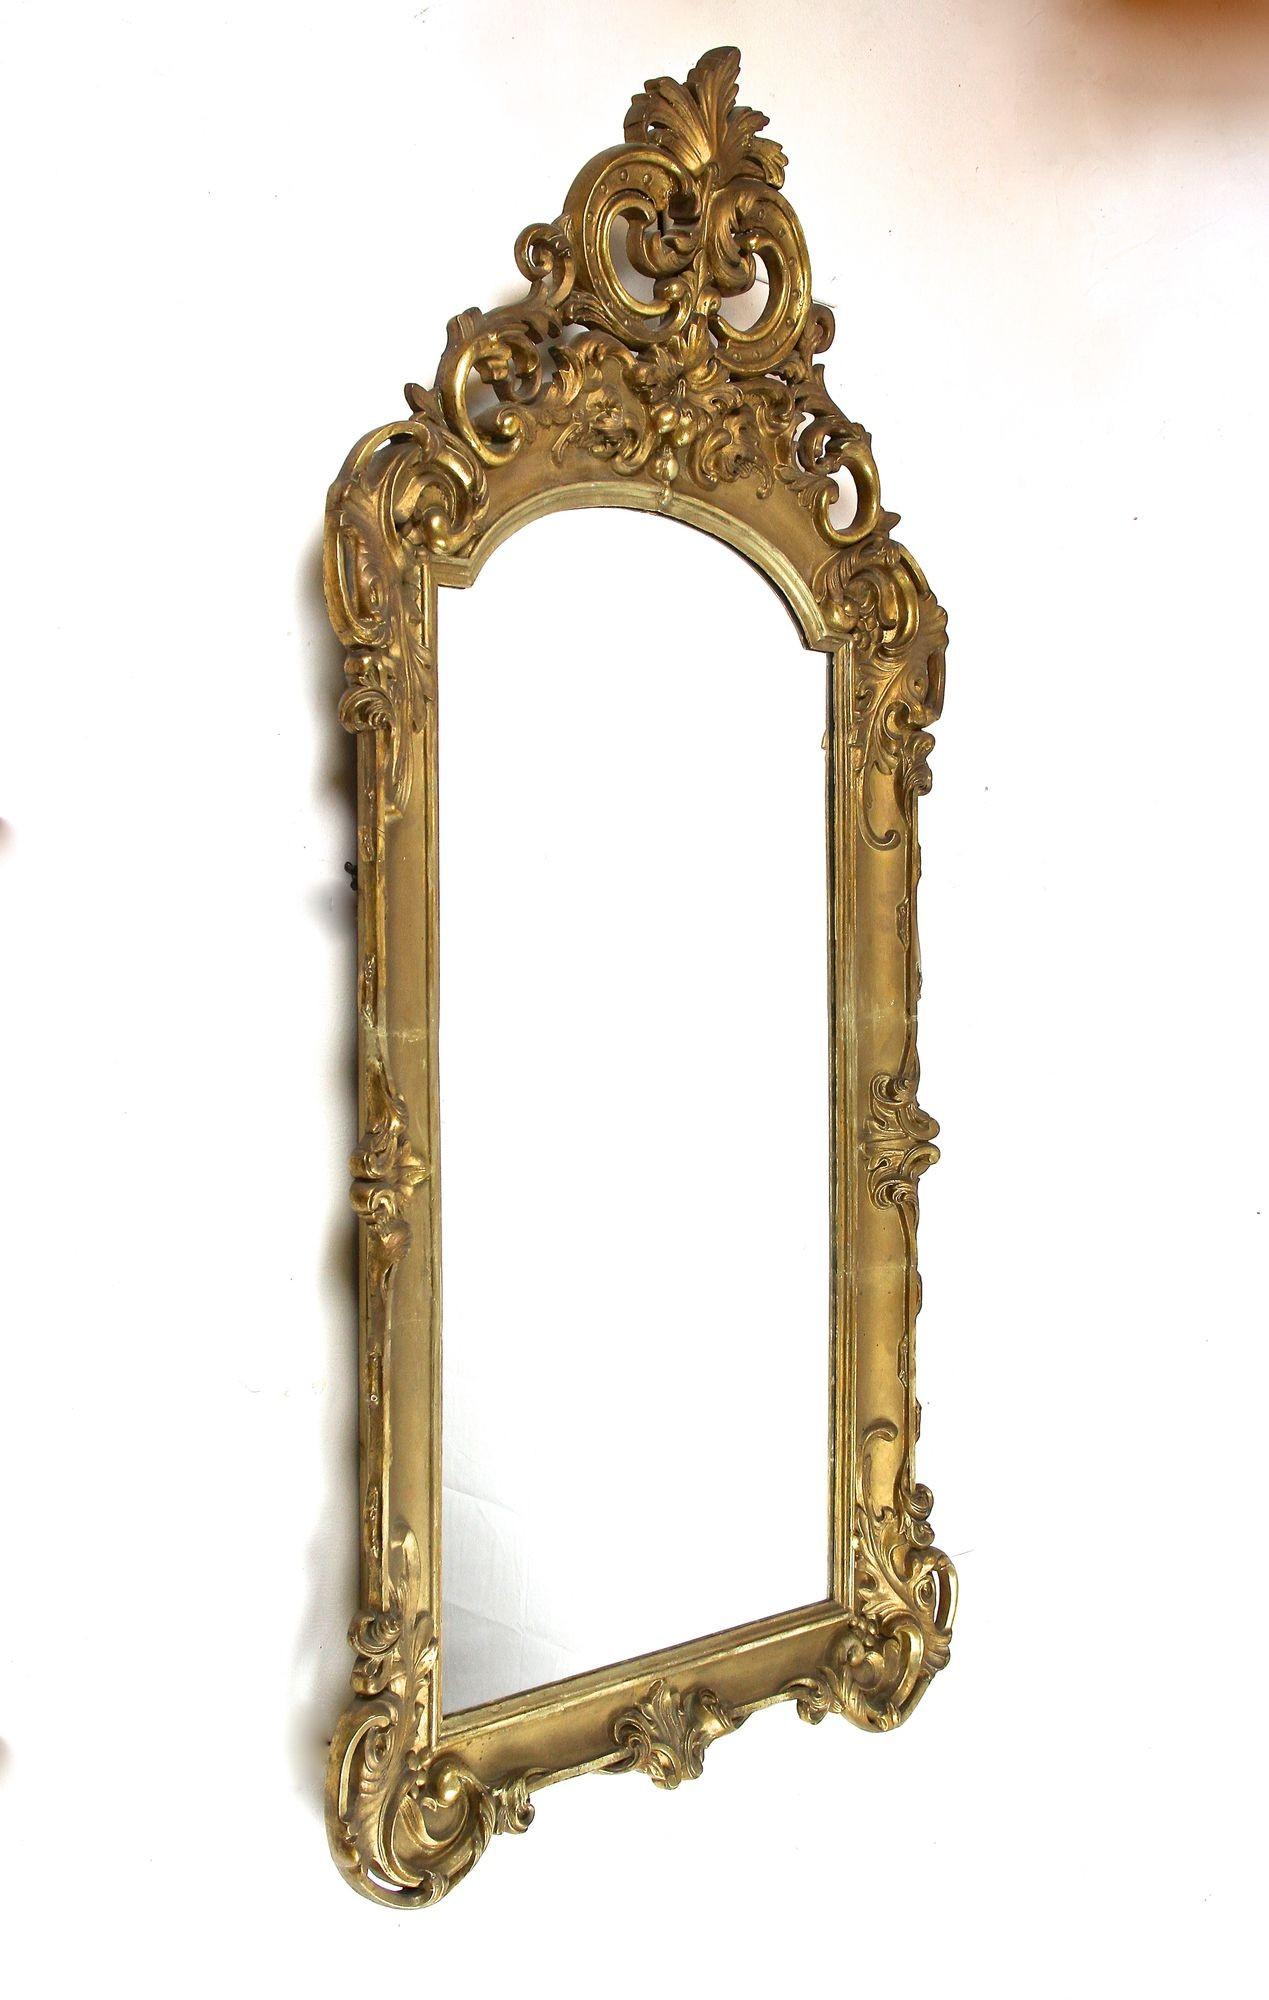 Extraordinary 18th century gilt wall mirror from the late baroque period in Austria around 1780. This artfully handcarved frame shows different gilt techniques (gold leaf/ composition gold/ bronzed) and is adorned by elaborately carved corners